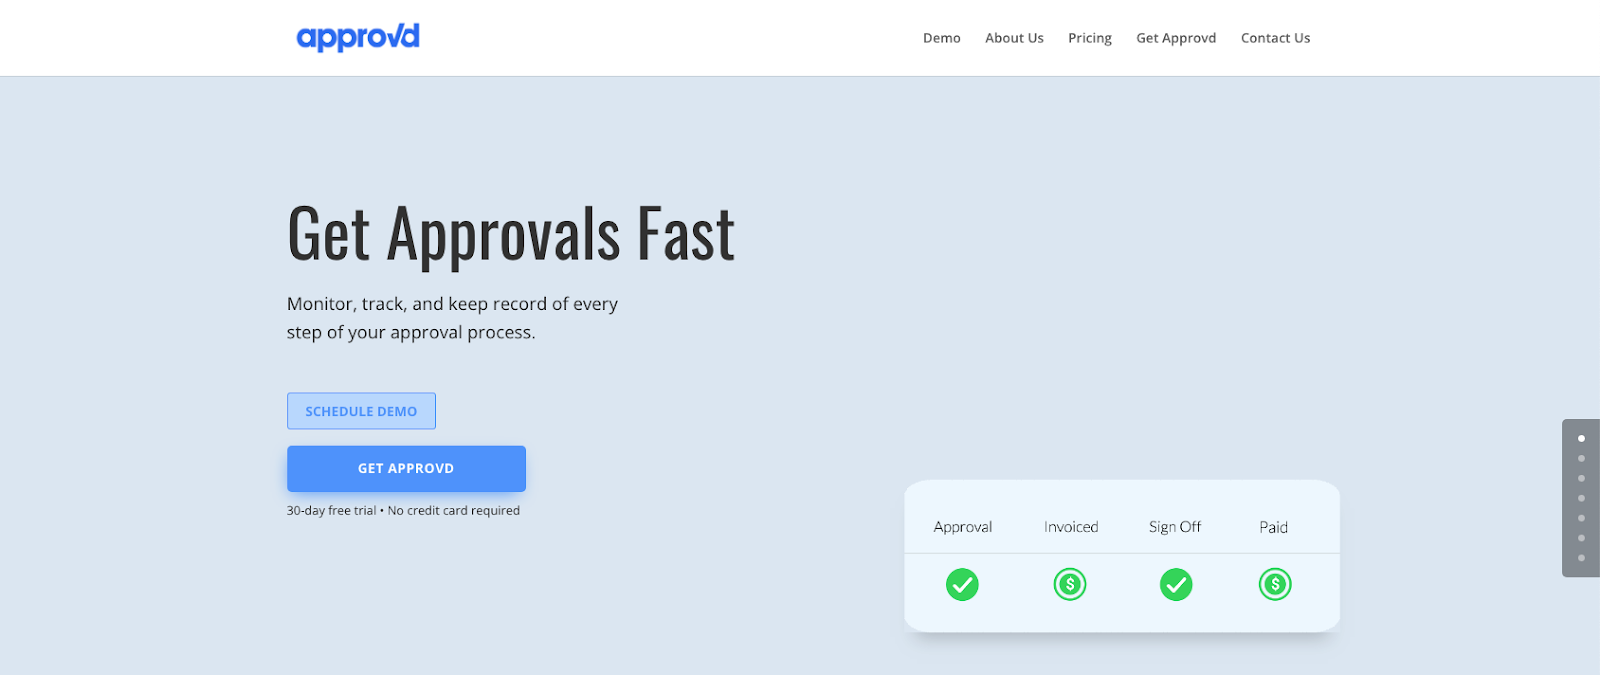 Get-Approvals-Fast-from-Approvd